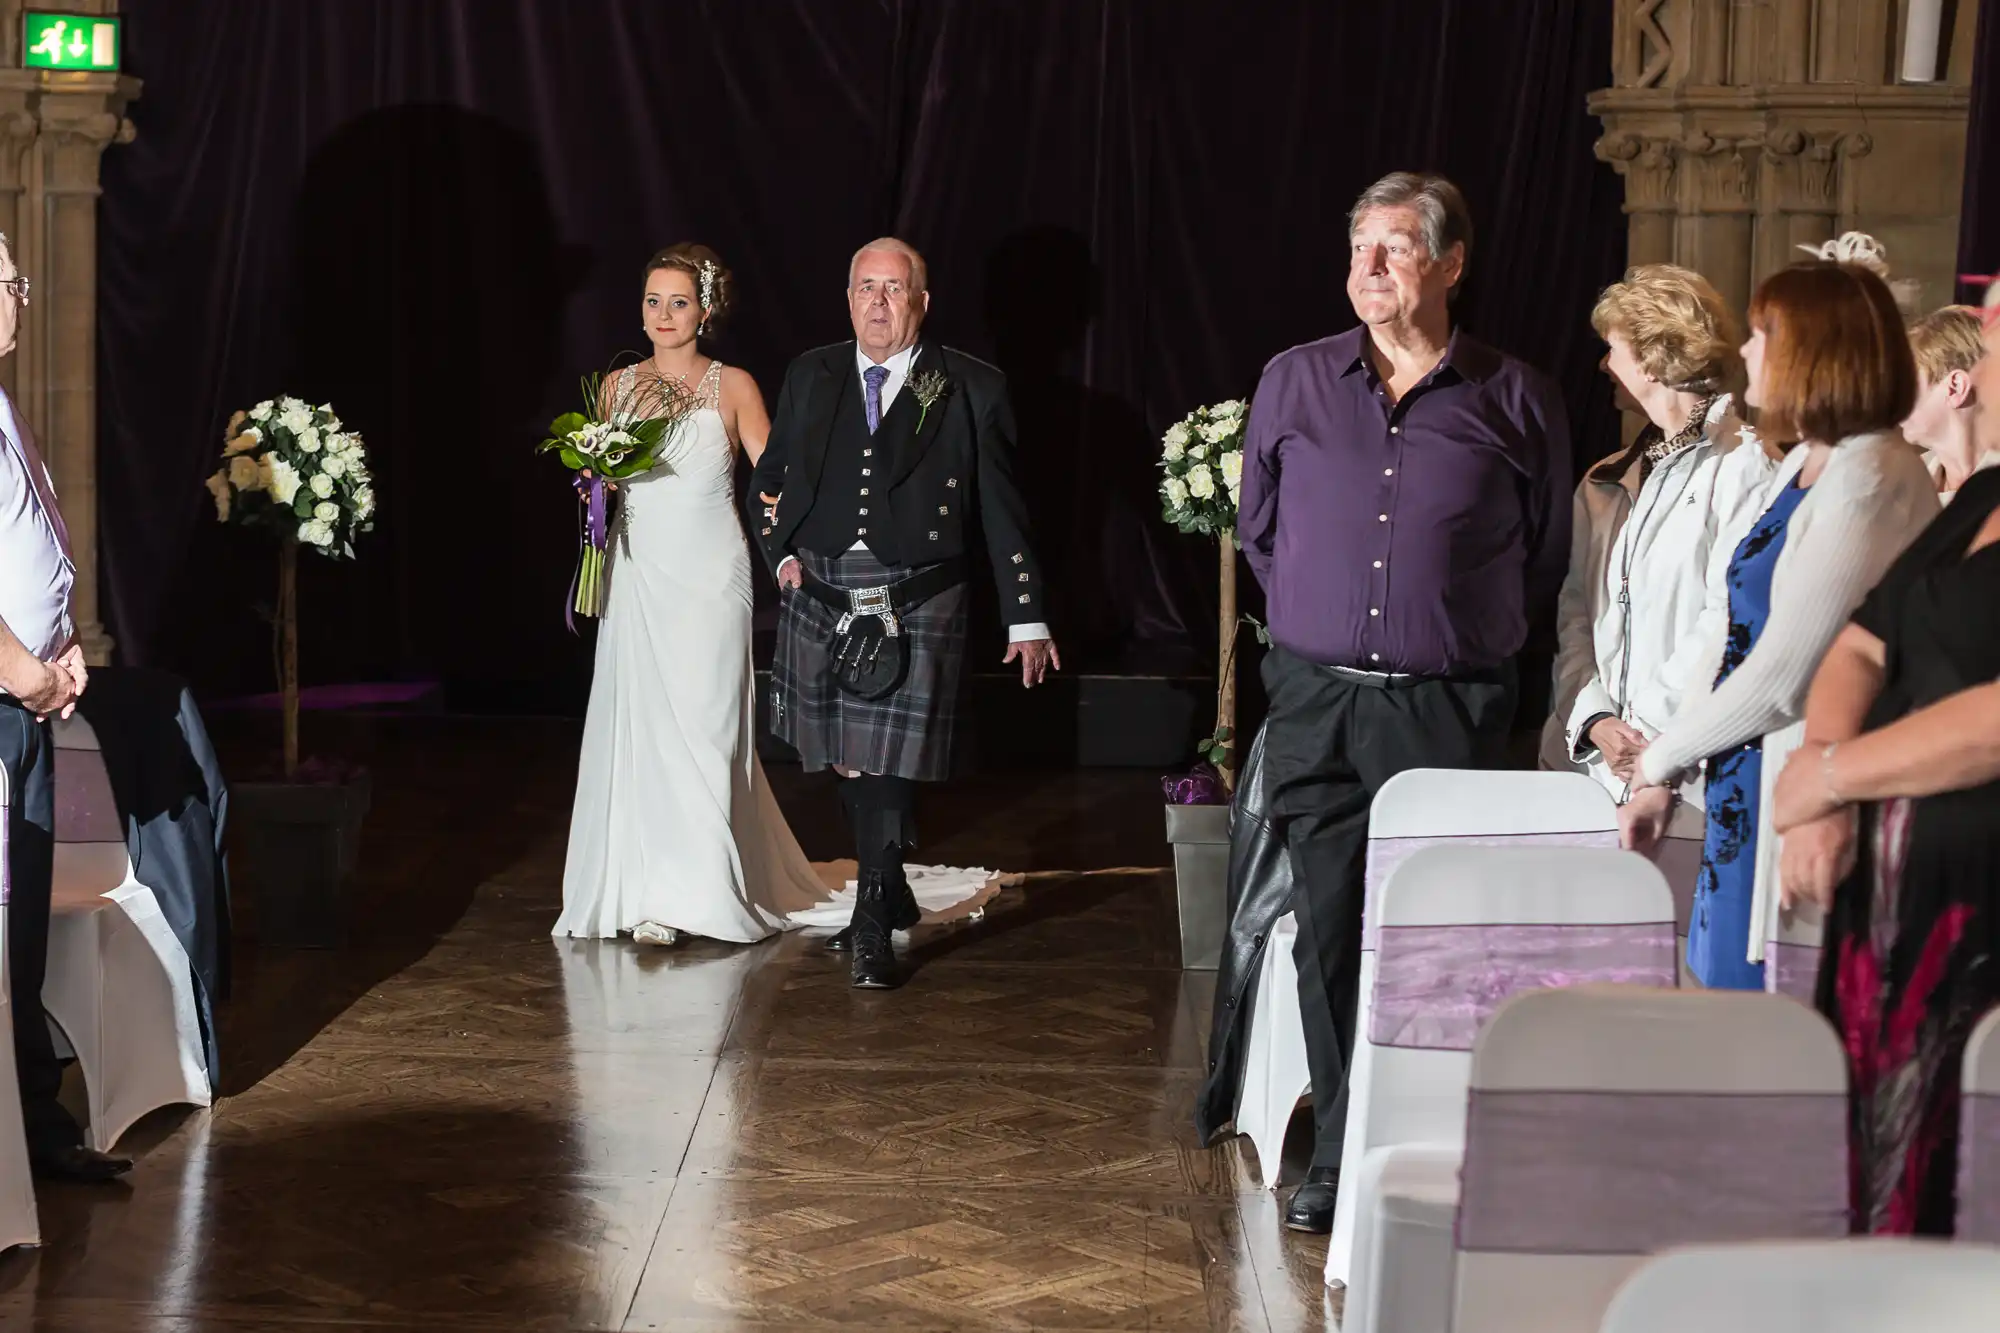 A bride and her father walk down the aisle past seated guests in a dimly lit venue, the father in a kilt and the bride holding a bouquet.